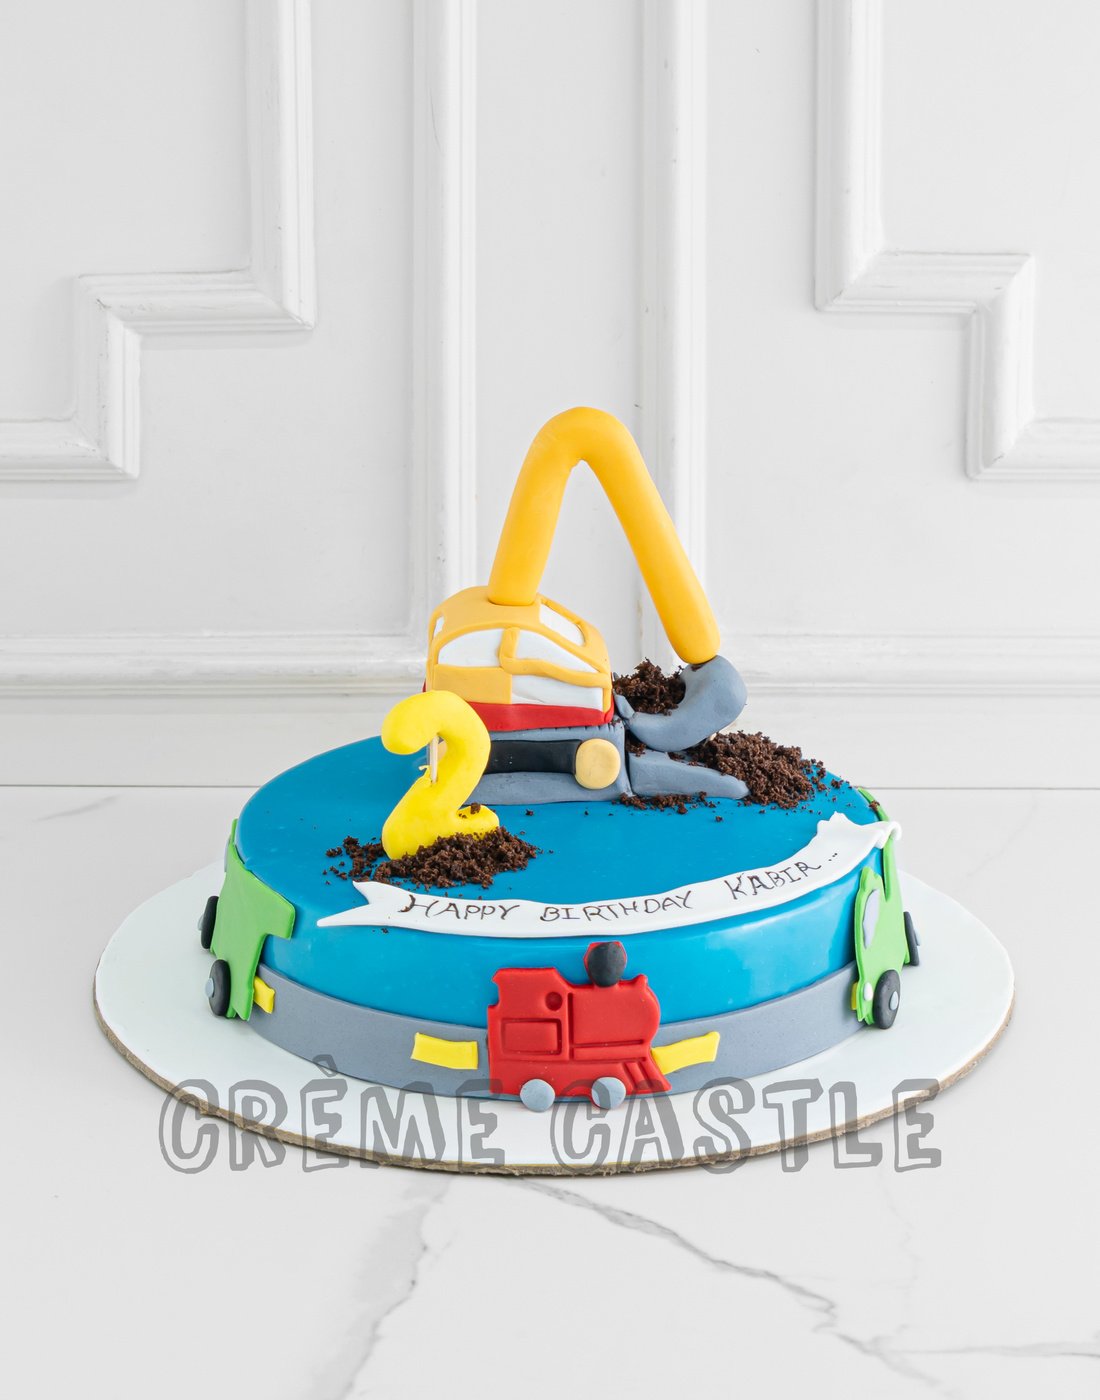 Crane Theme Cake in Blue by Creme Castle